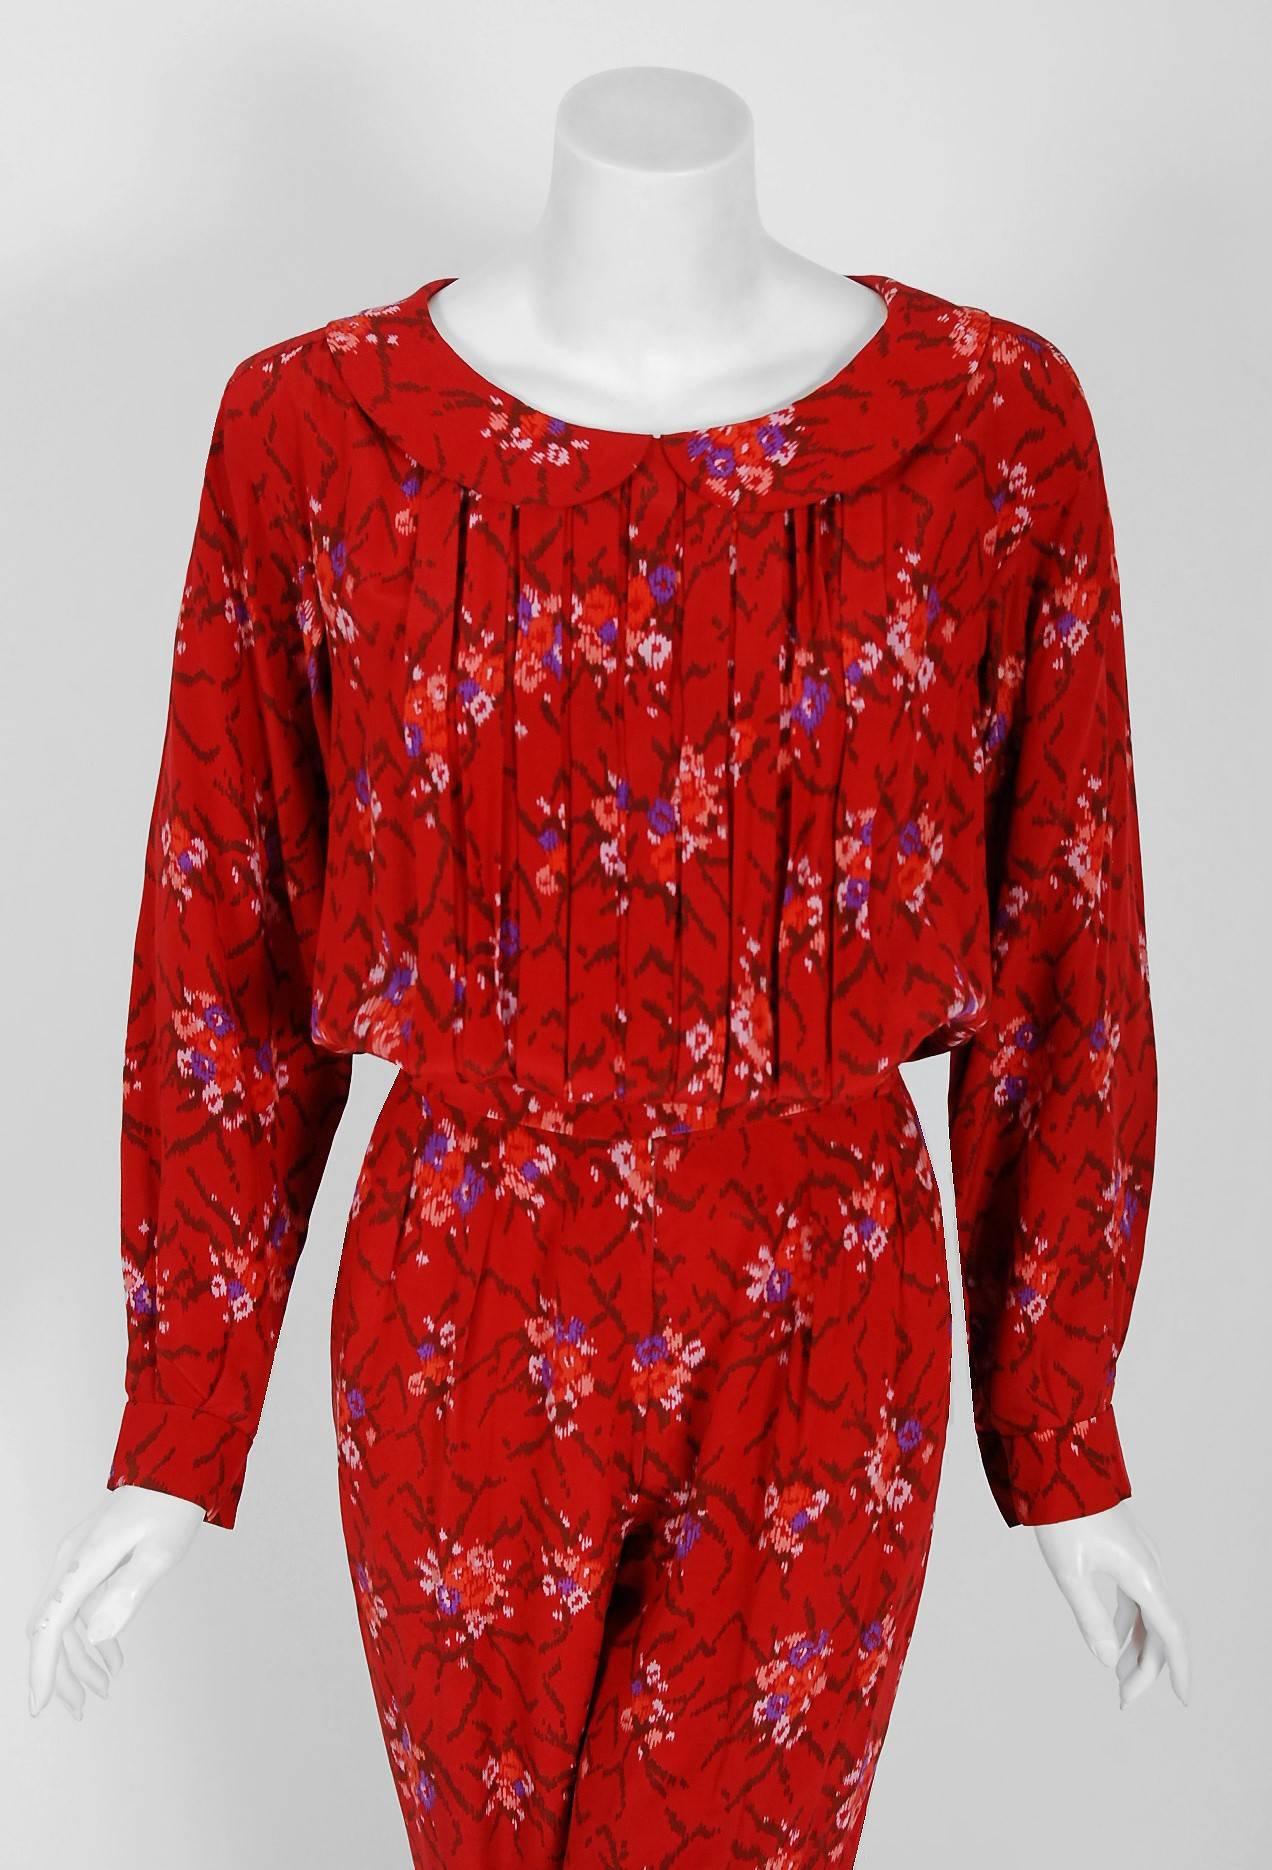 This extremely chic Lanvin treasure, in the most stunning ruby-red graphic floral print, is a statement piece. It manifests liveliness and makes you feel confident. The bodice has a chic peter-pan collar with three-dimensional couture pleating. I